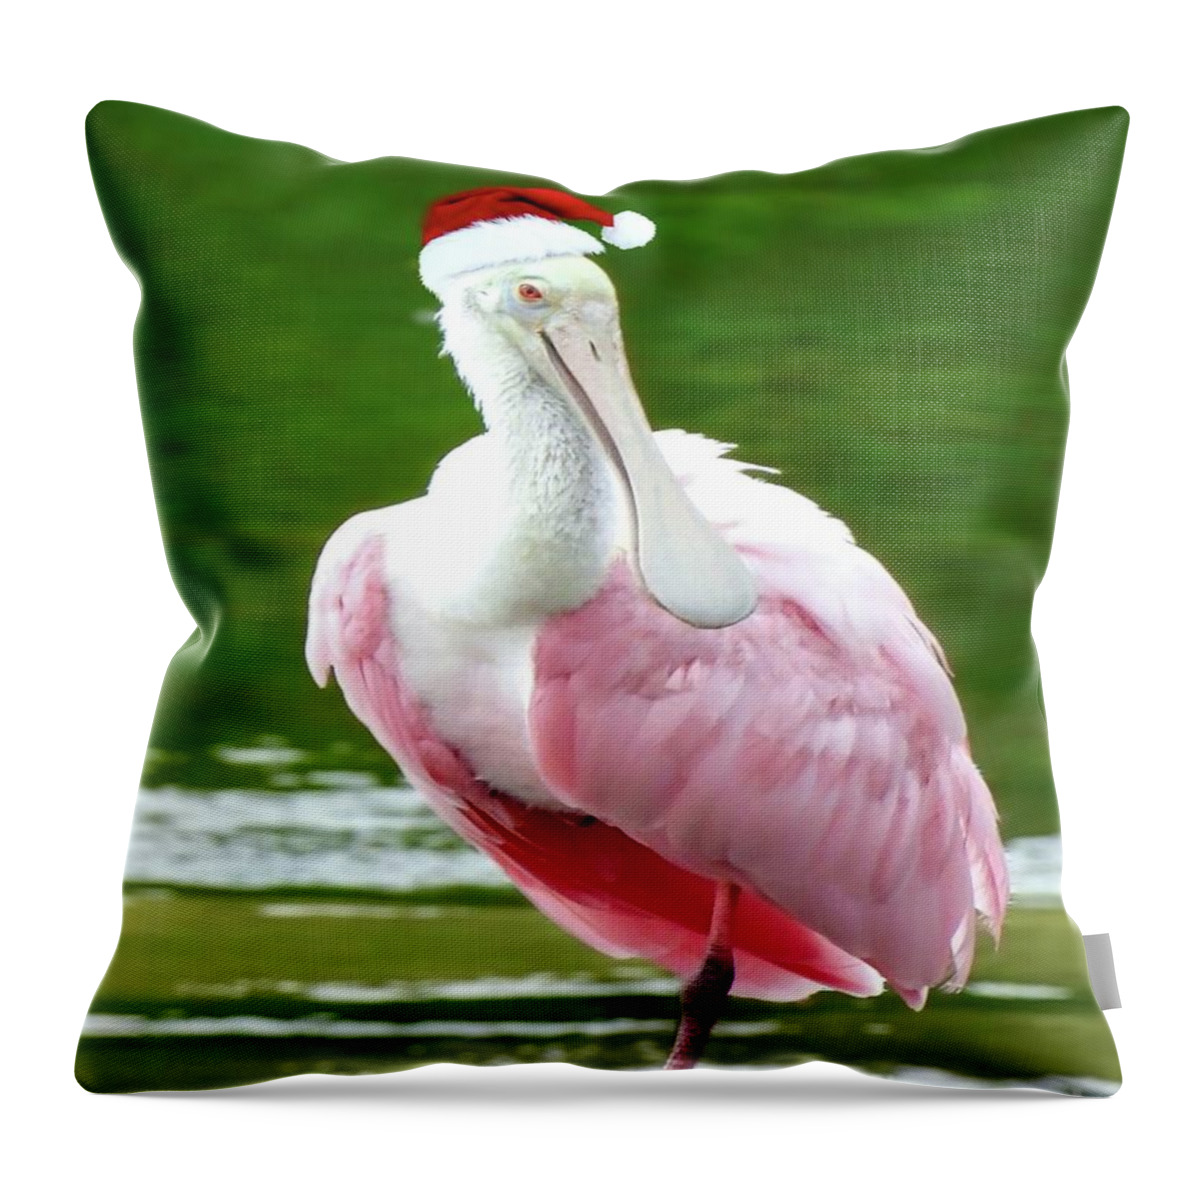 Santa Hat Throw Pillow featuring the photograph Santa Spoonbill by Beth Myer Photography